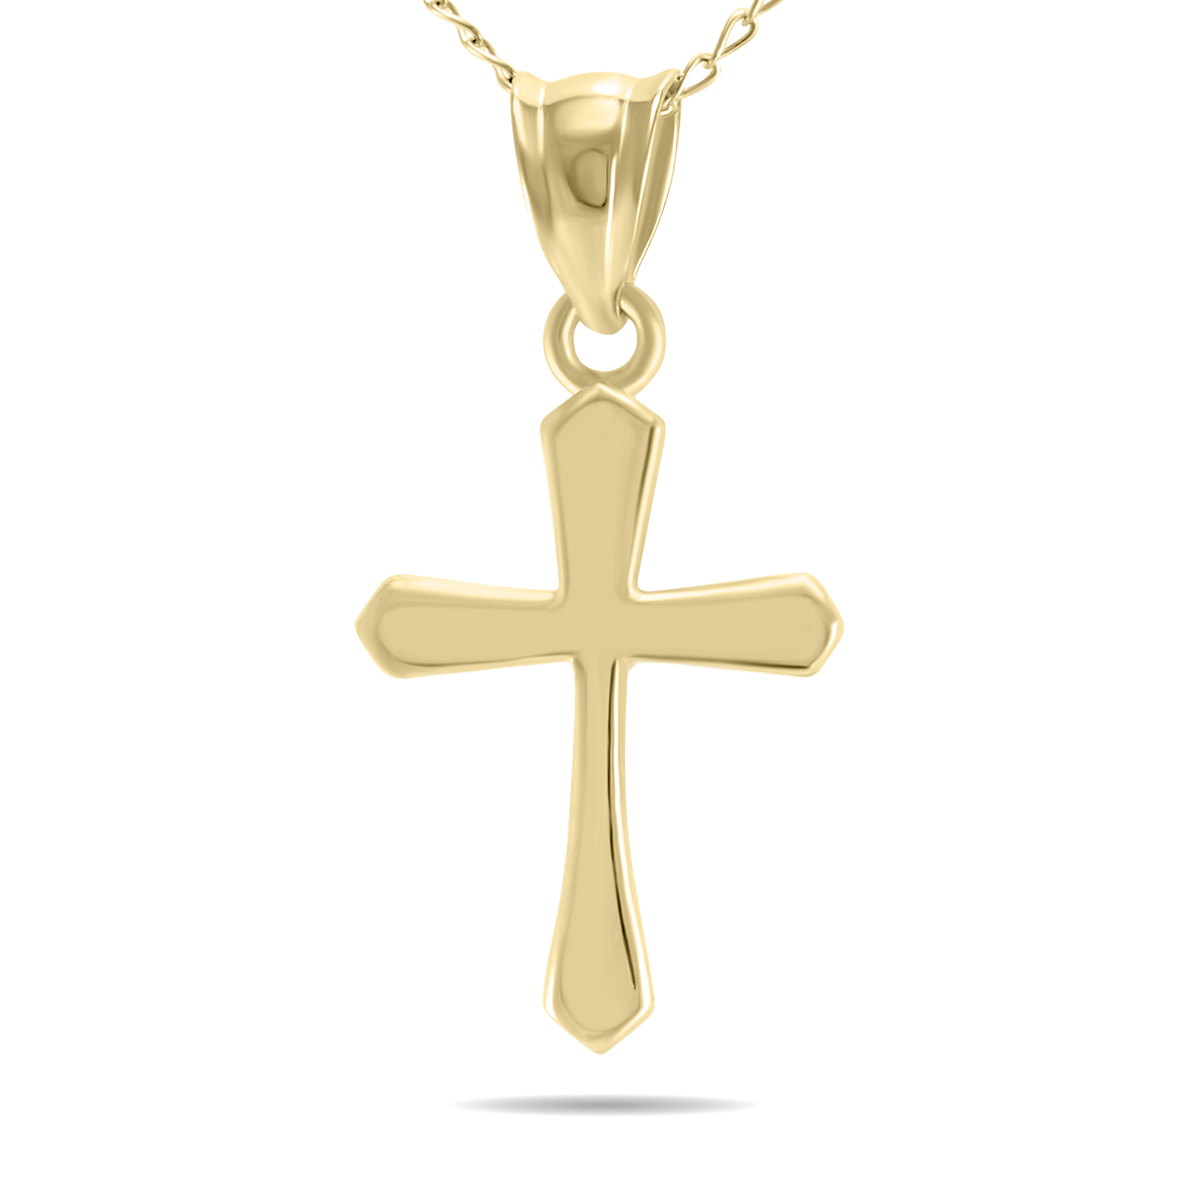 Simple Solid Plain Cross Pendant with Chain Necklace in 10K Yellow Gold